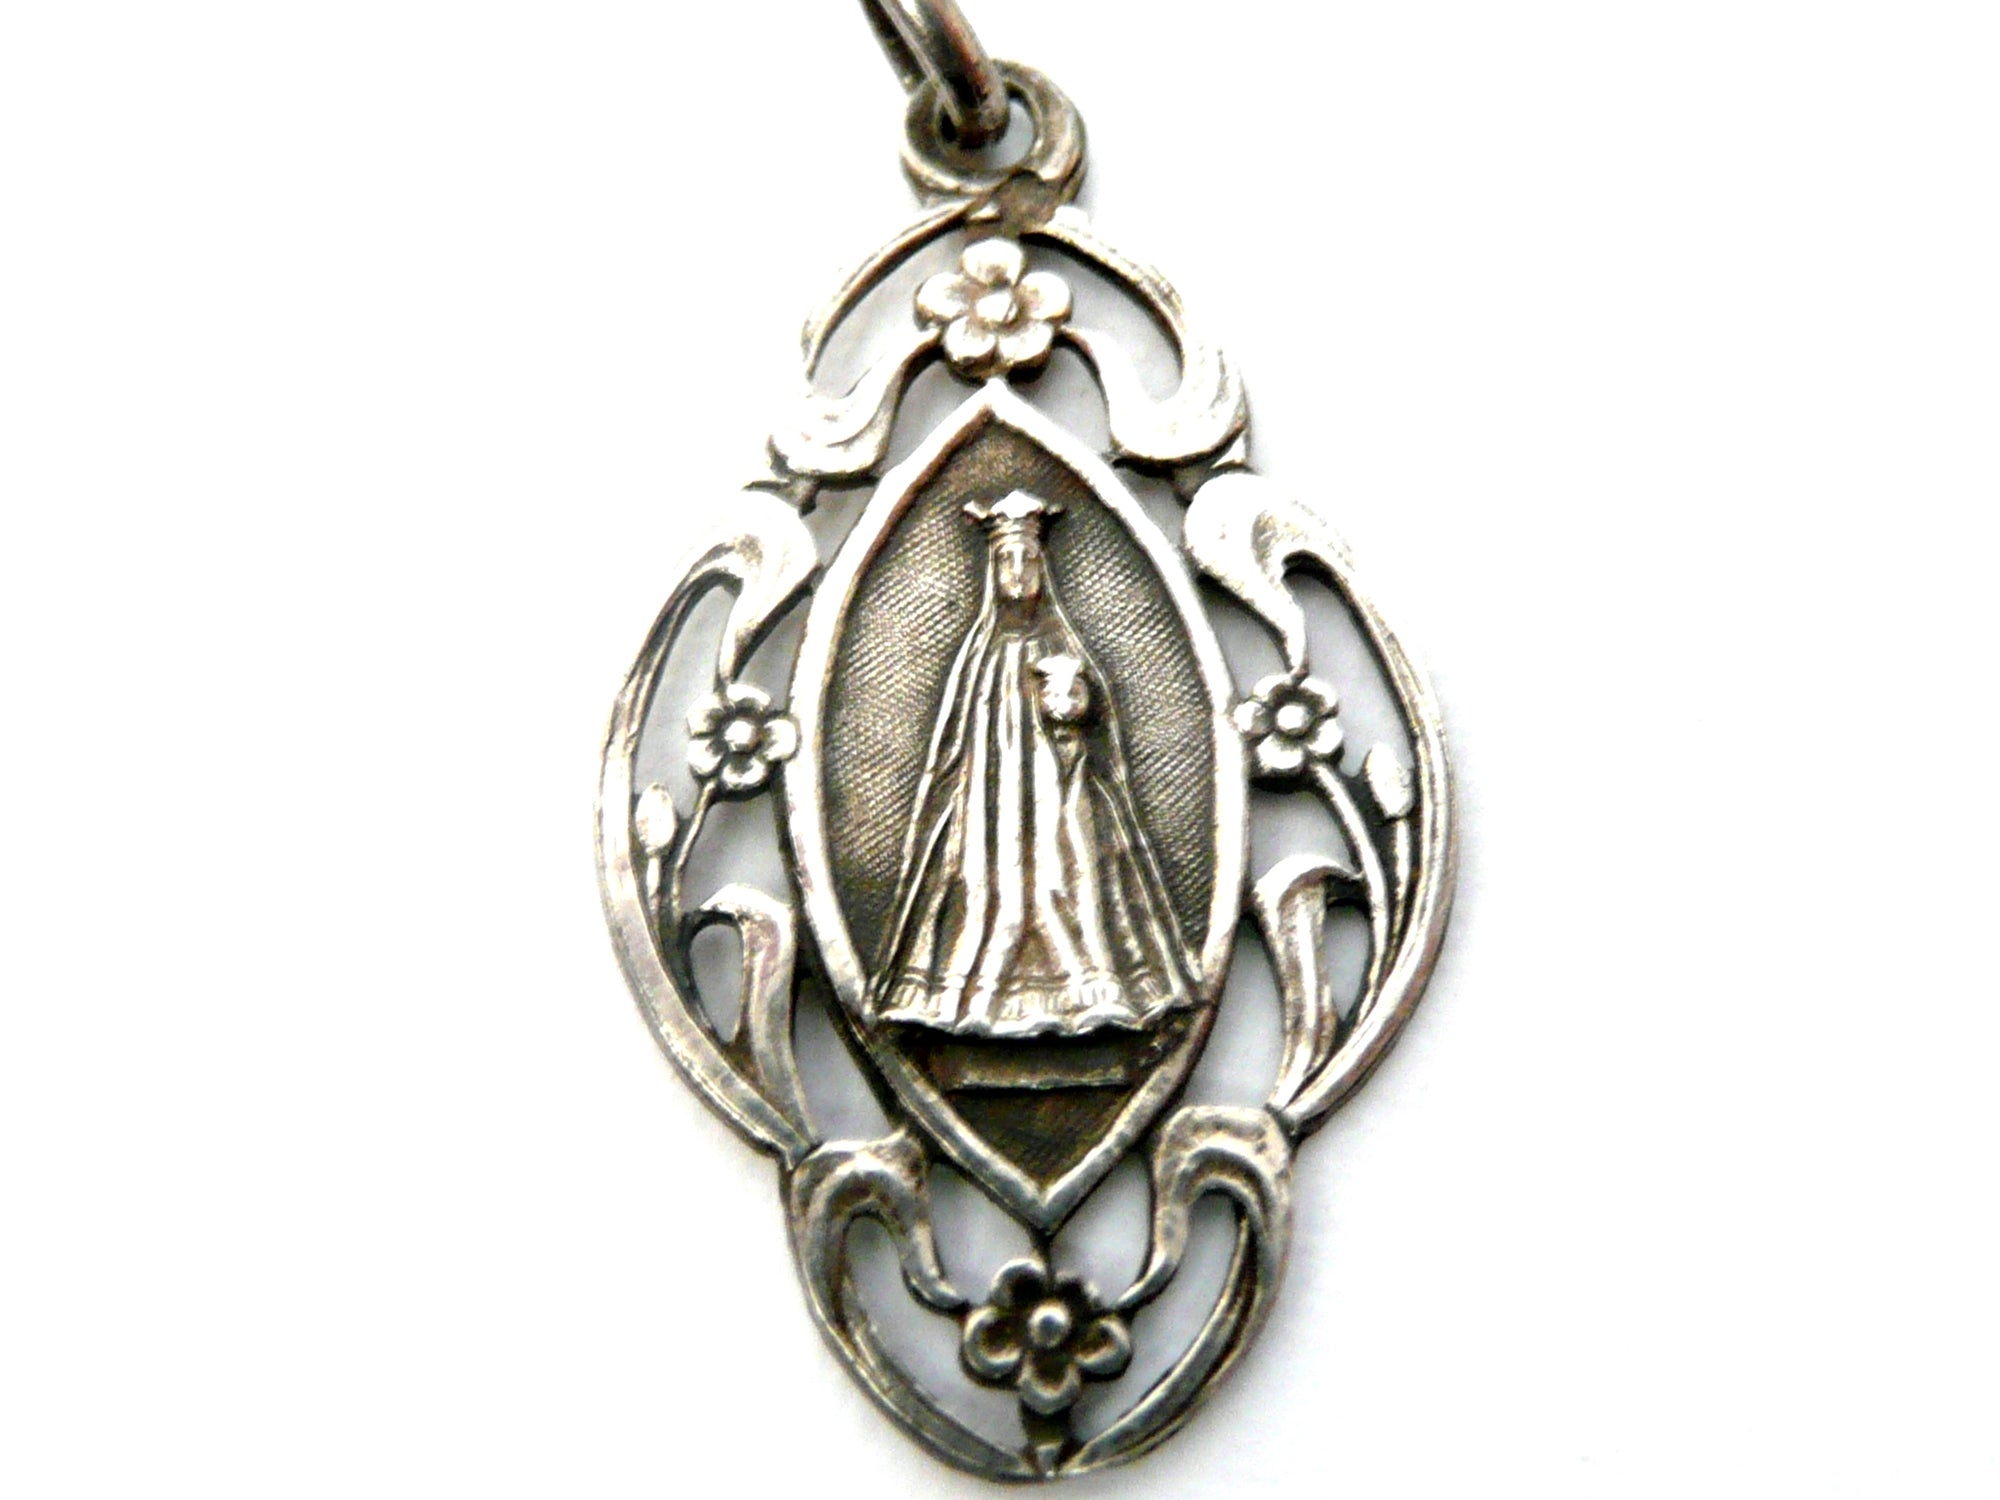 Our Lady of Rocamadour Medal, Vintage French Silver Virgin Mary and Child Jesus Medal